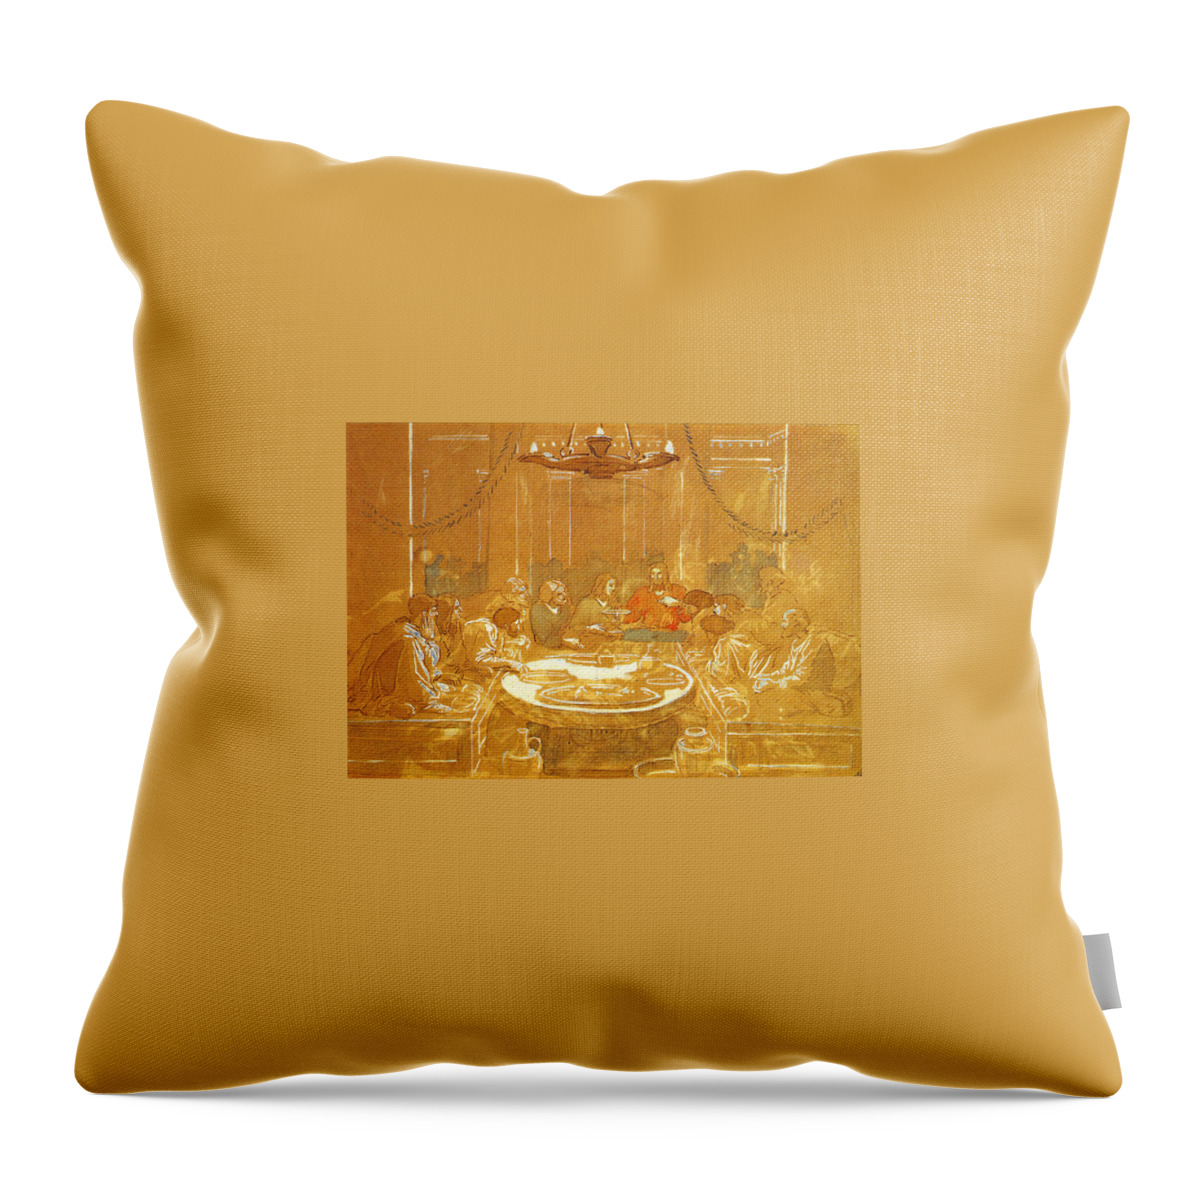 Alexandr Ivanov Throw Pillow featuring the painting Alexandr Ivanov Last supper by MotionAge Designs